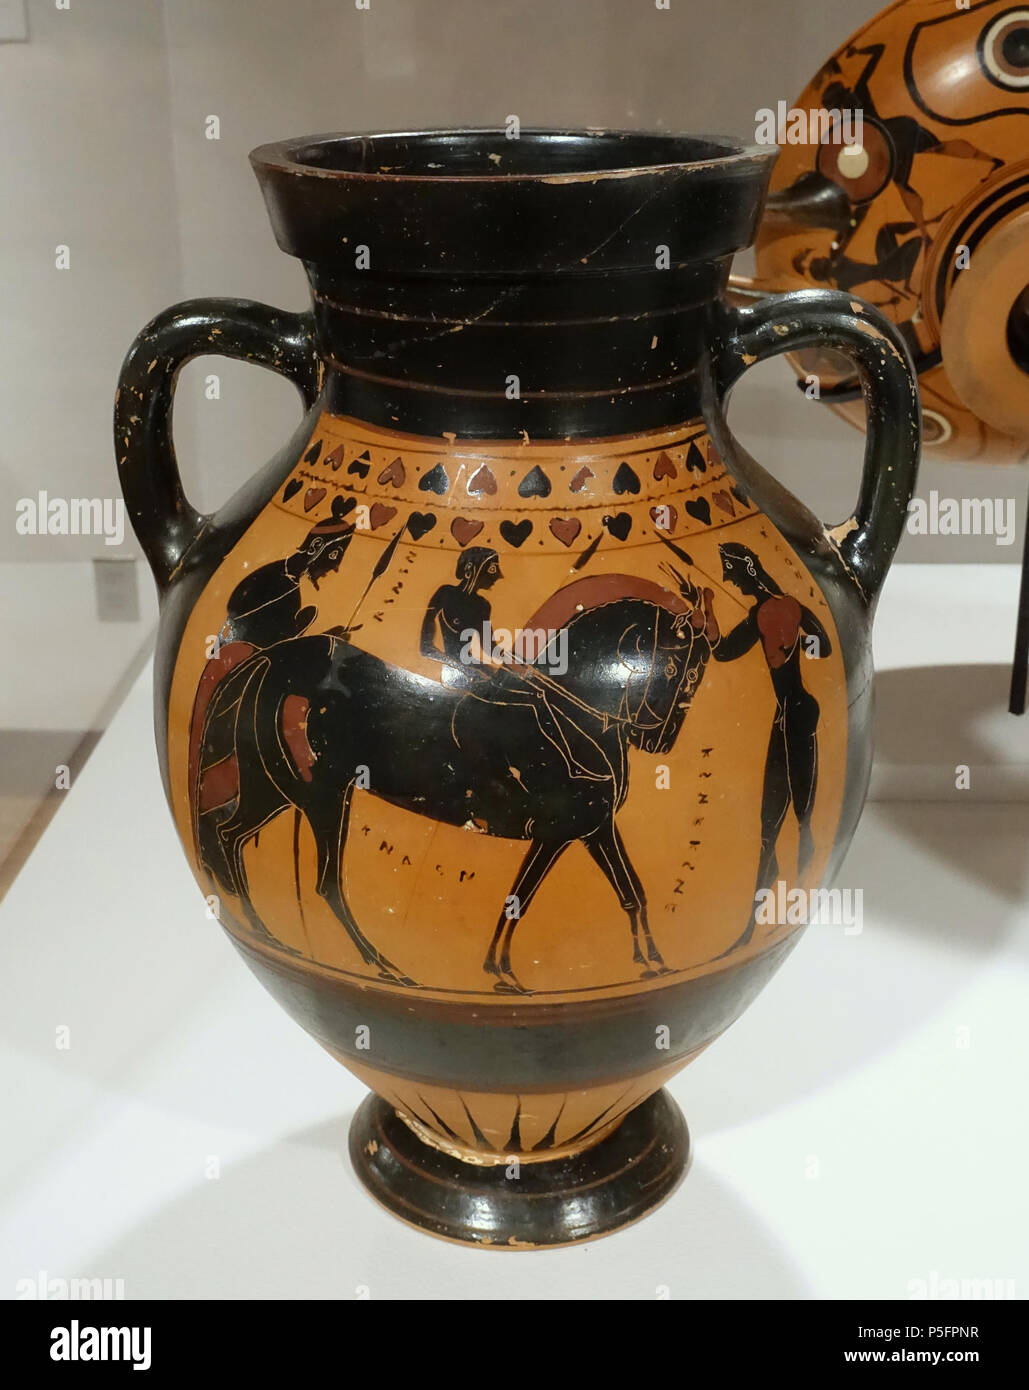 N/A. English: Exhibit in the Krannert Art Museum, University of Illinois at Urbana-Champaign - Urbana-Champaign, Illinois, USA. This work is old enough so that it is in the . 15 June 2015, 13:08:58. Daderot 94 Amphora with equestrian scenes, Pointed Nose Painter, Tyrrhenian group, Greek, Attic, c. 550 BC, black-figure technique - Krannert Art Museum, UIUC - DSC06540 Stock Photo